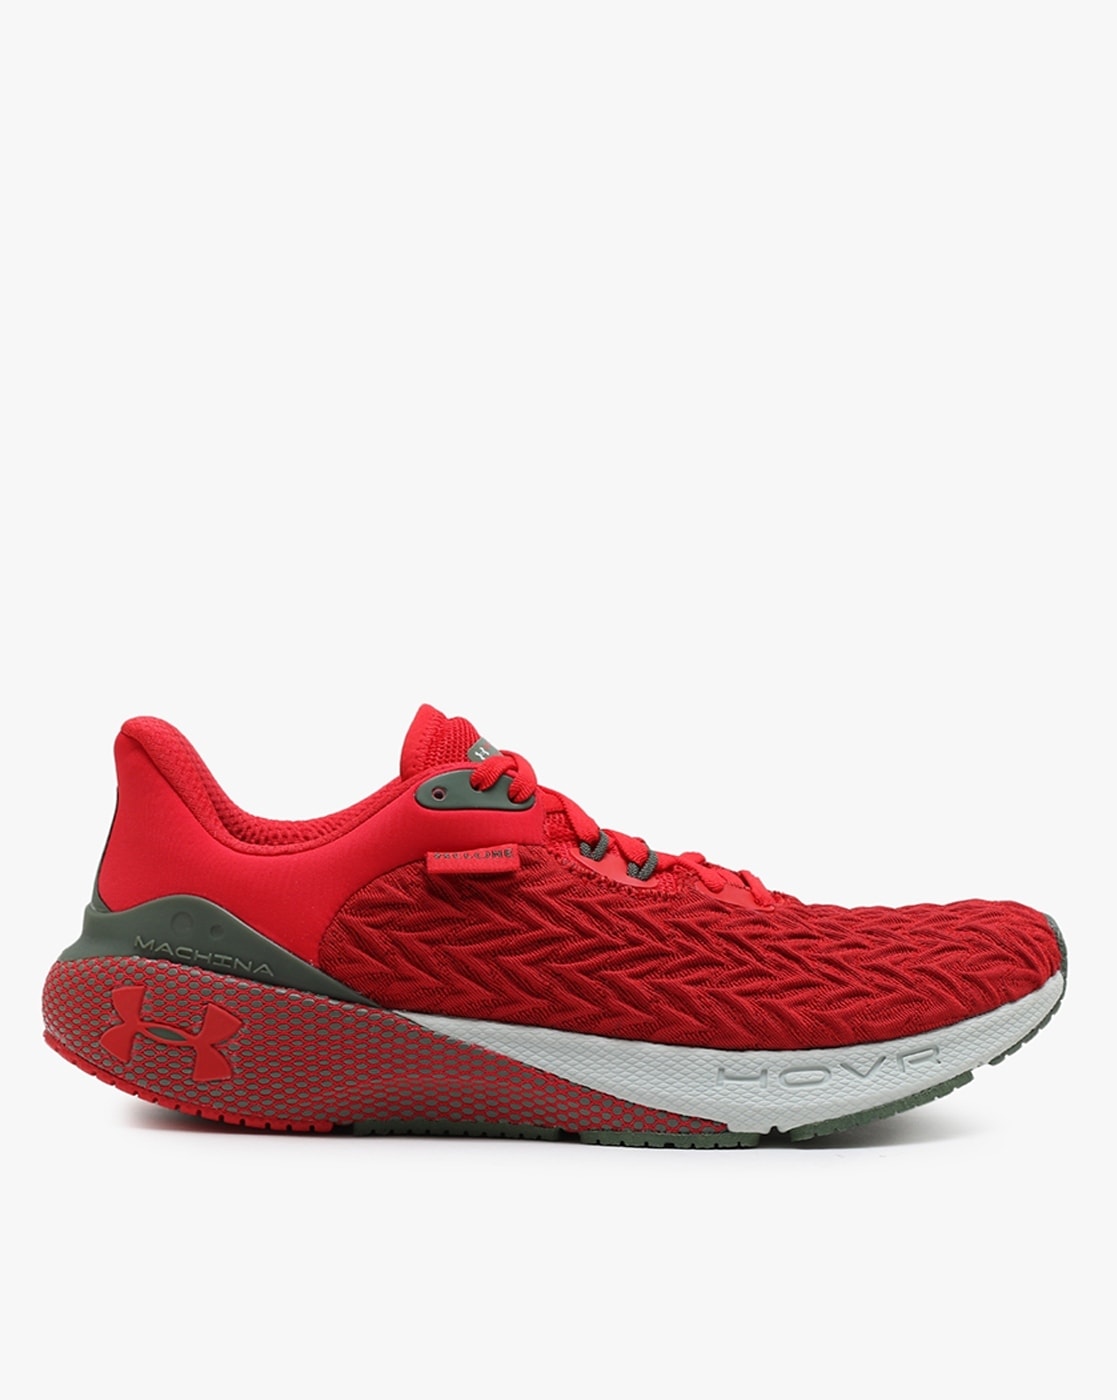 Under Armour Hovr Shoes at Rs 3000/pair